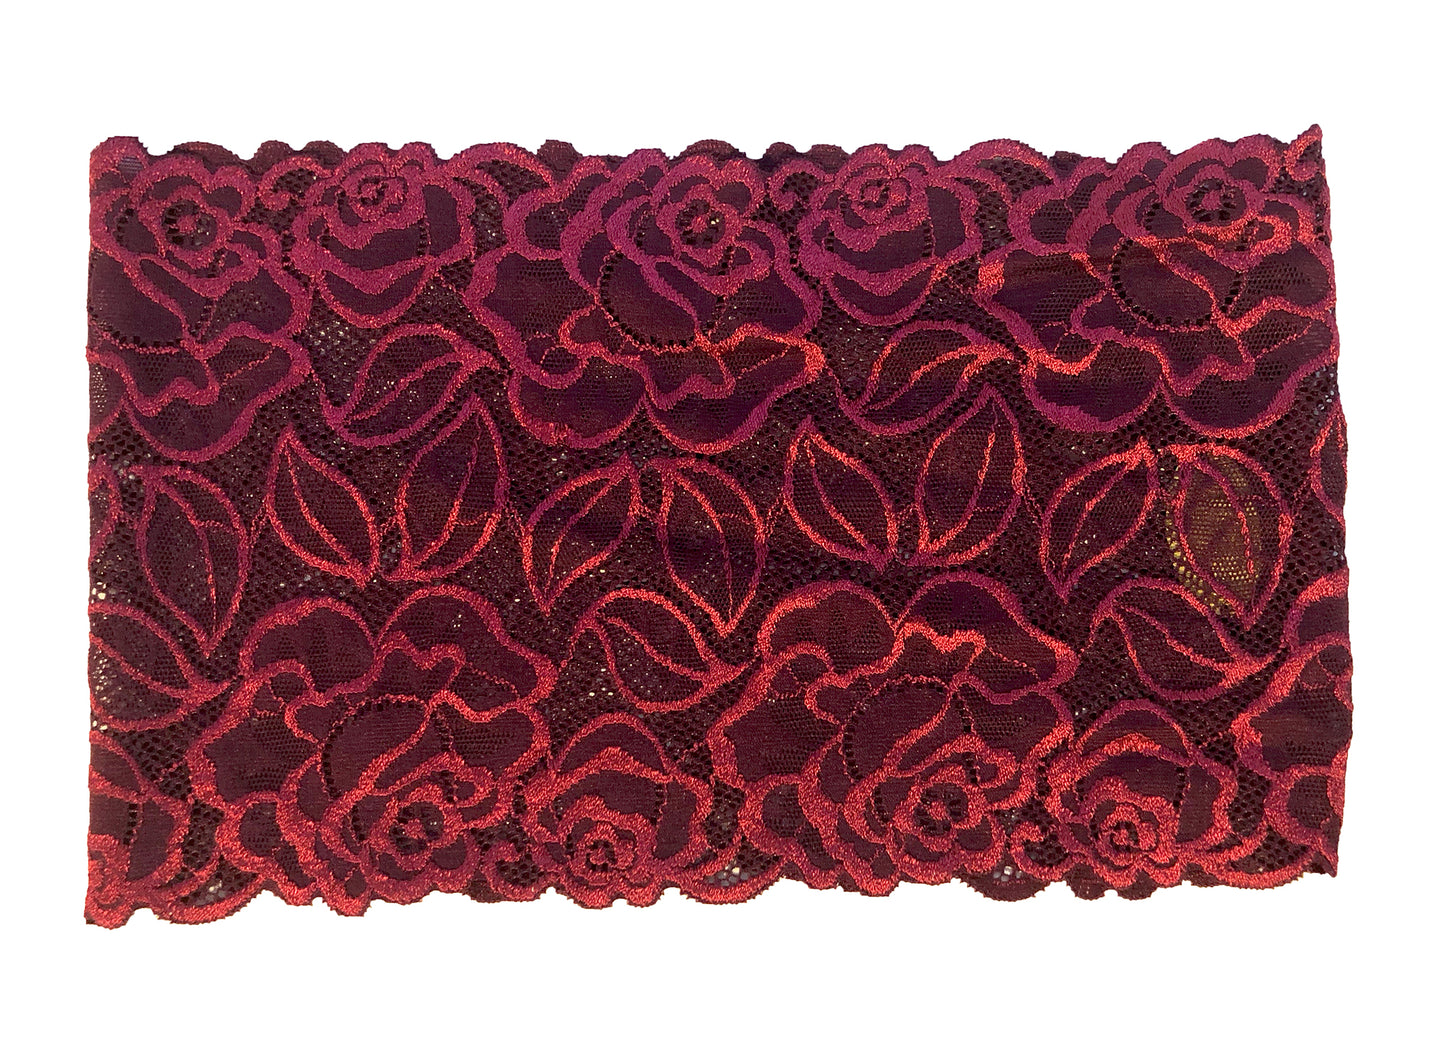 Burgundy red lace headband super wide